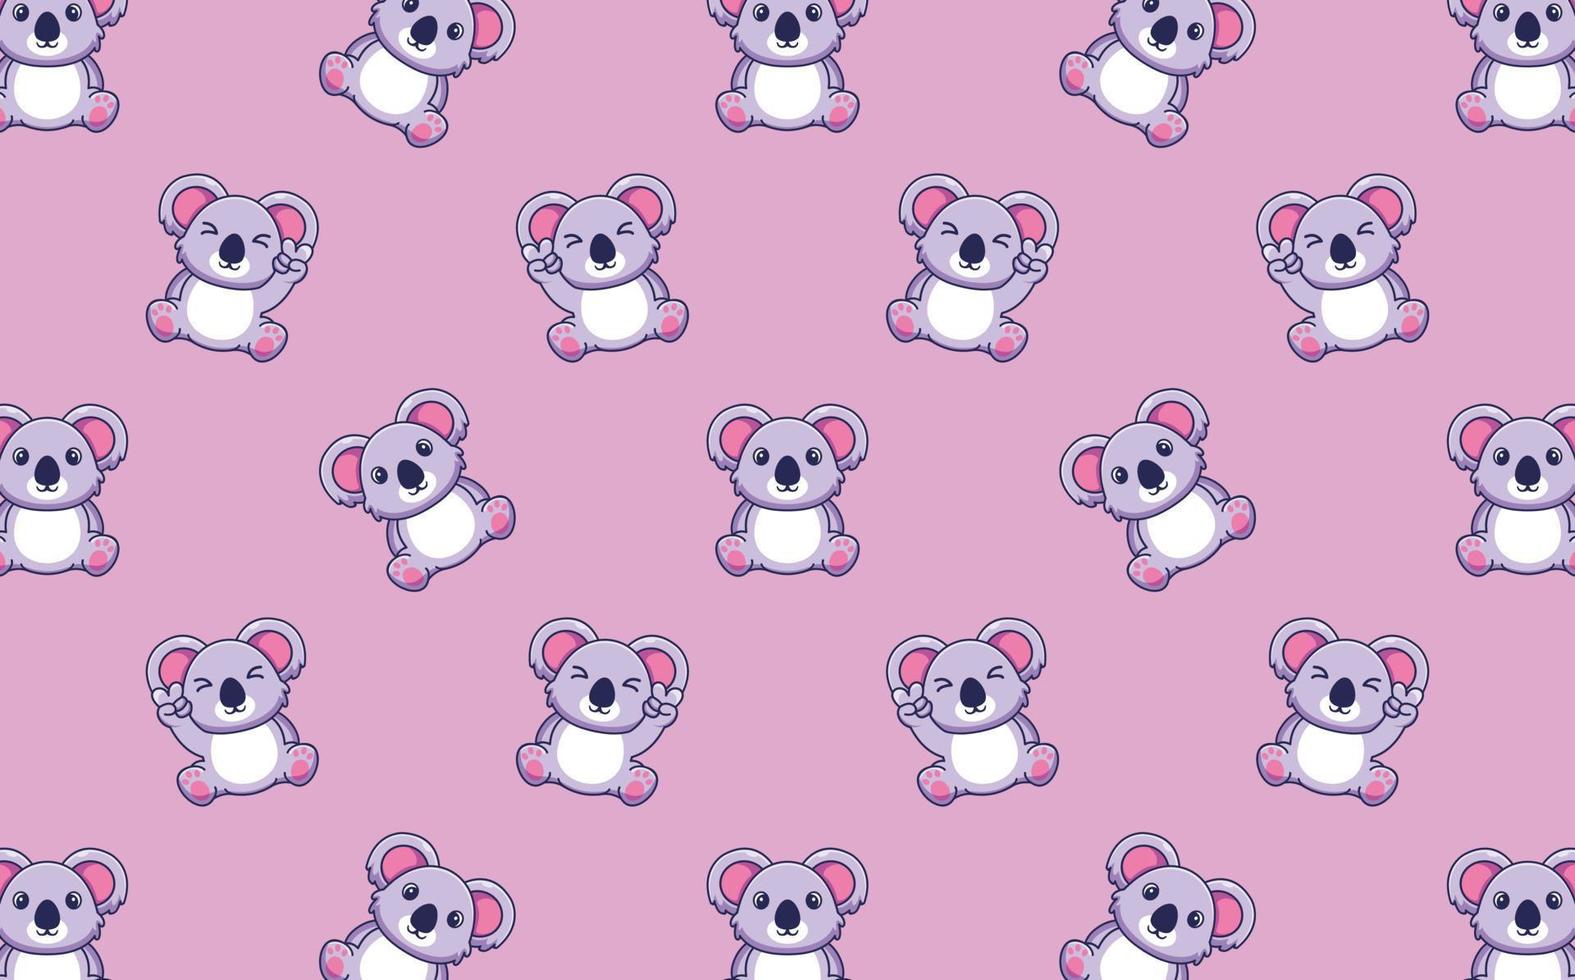 Seamless pattern with cute koala sitting and showing peace sign hand, vector illustration